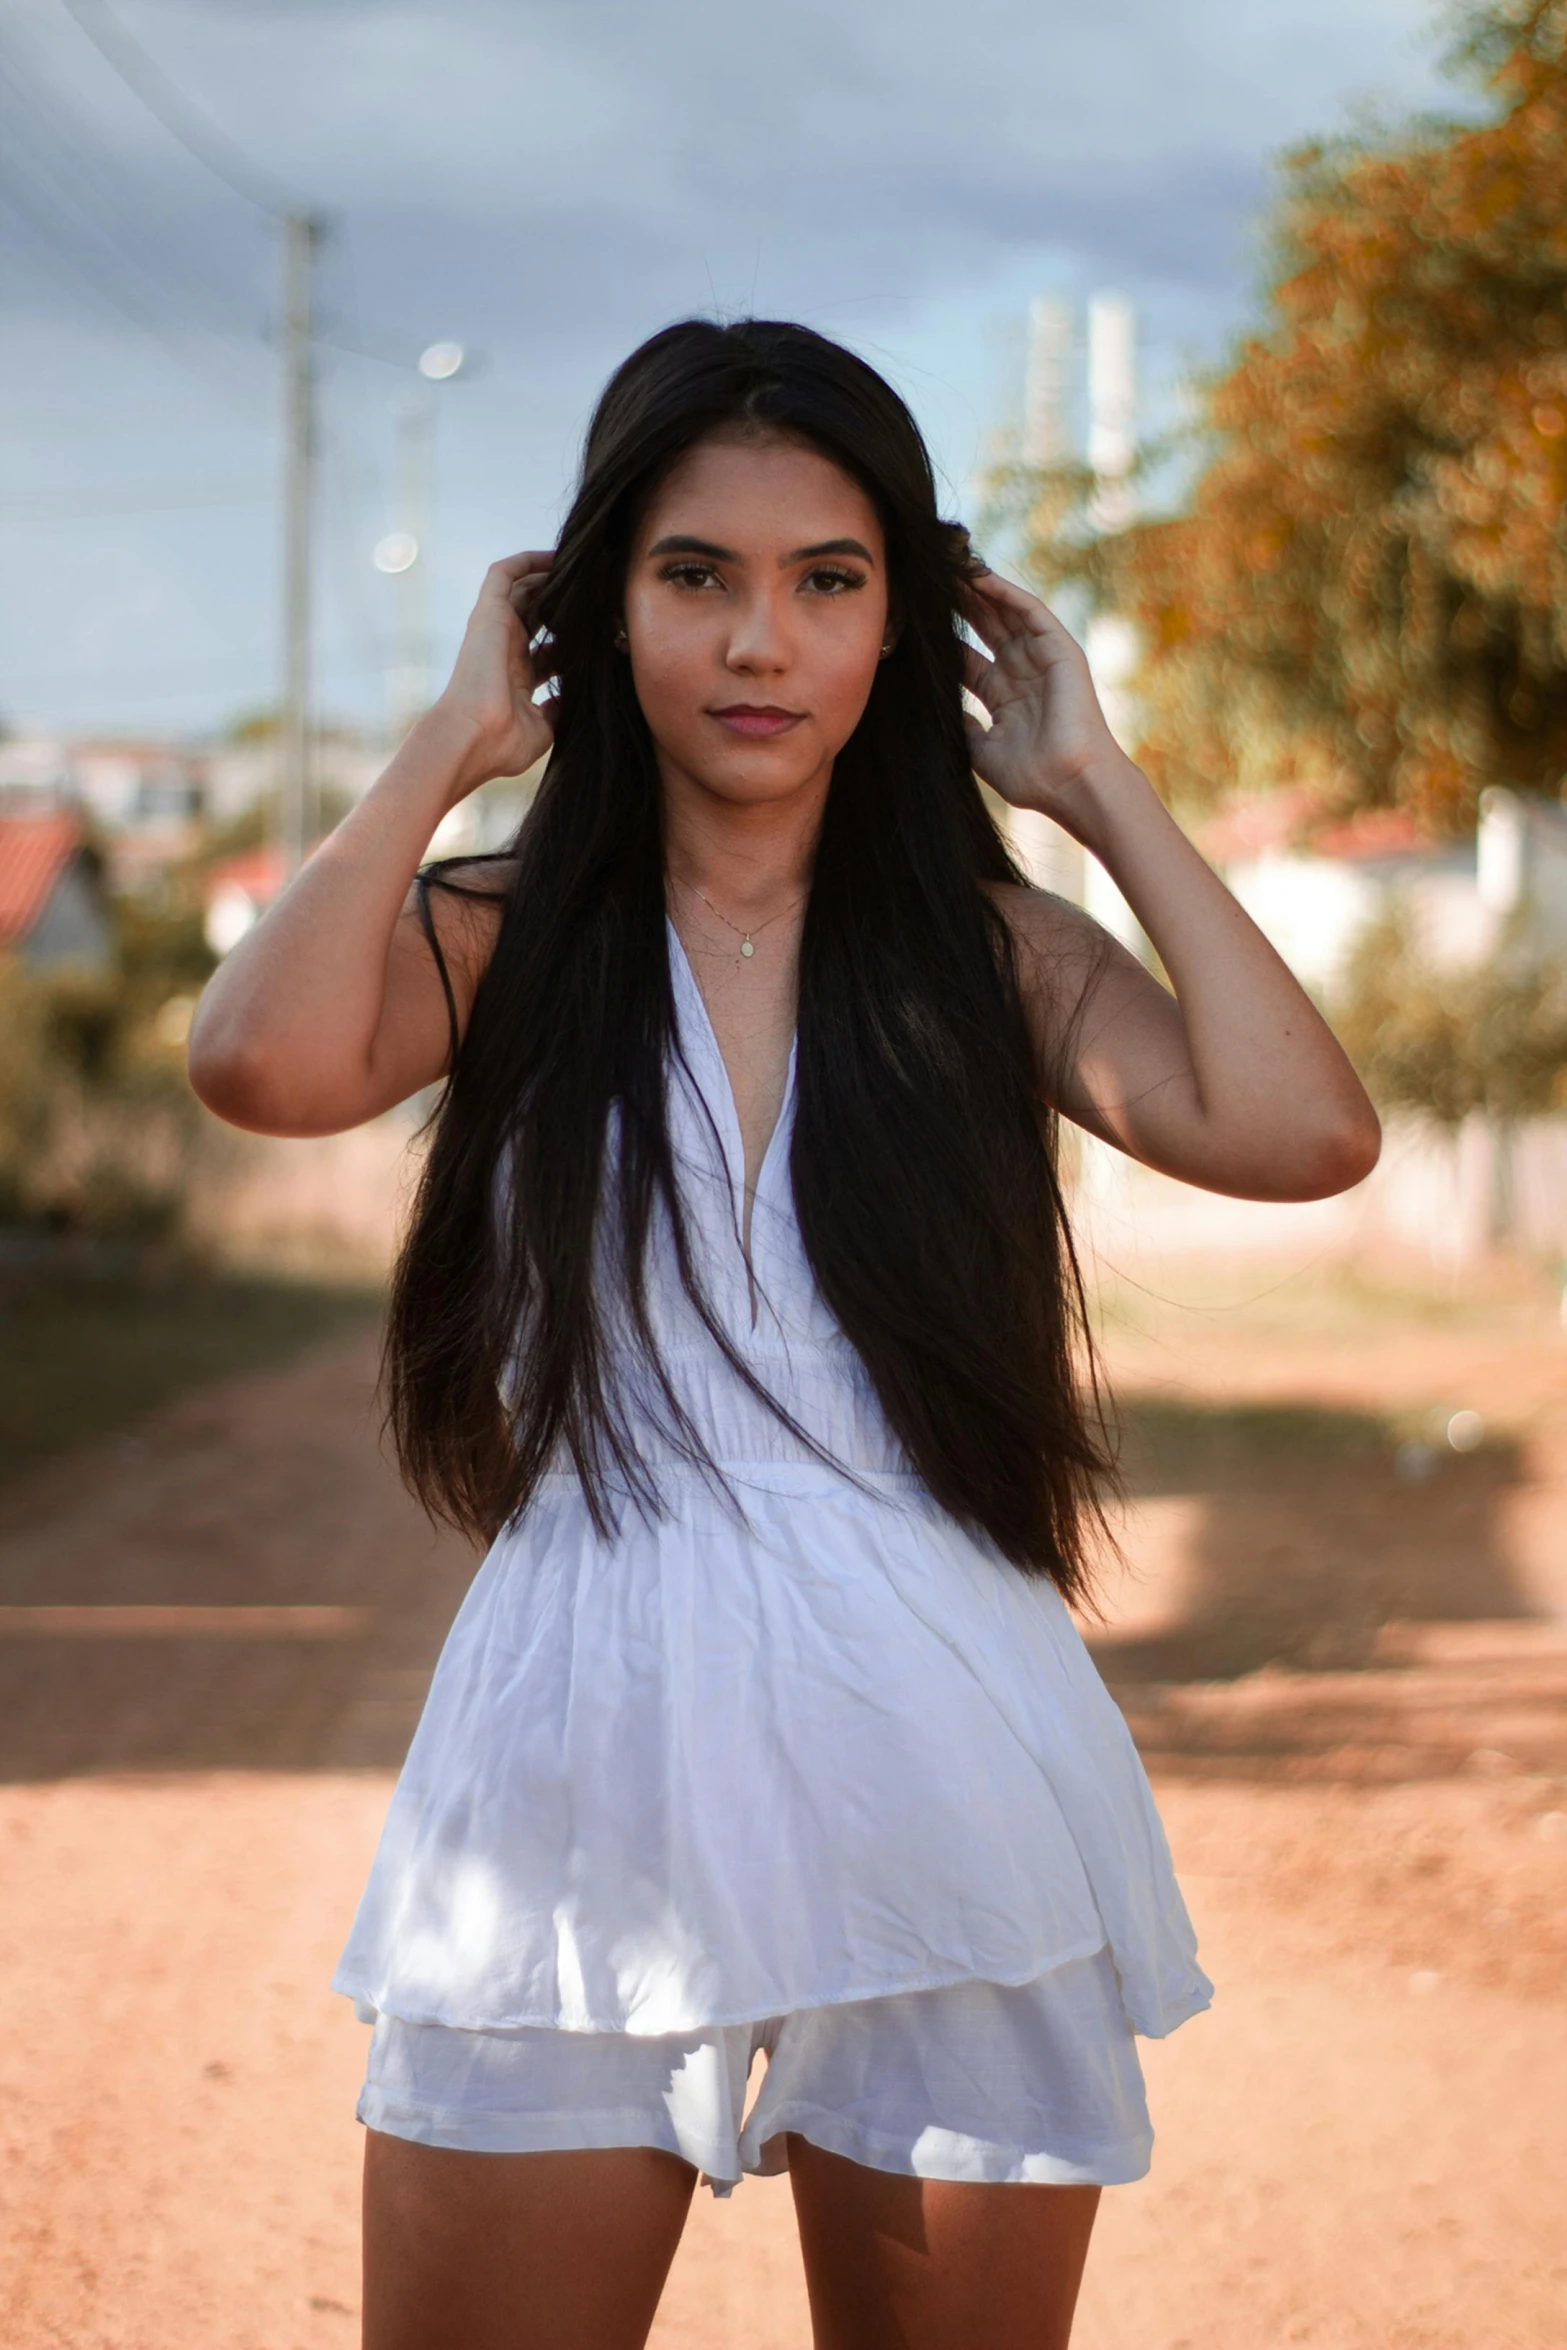 a woman standing on dirt road with long black hair